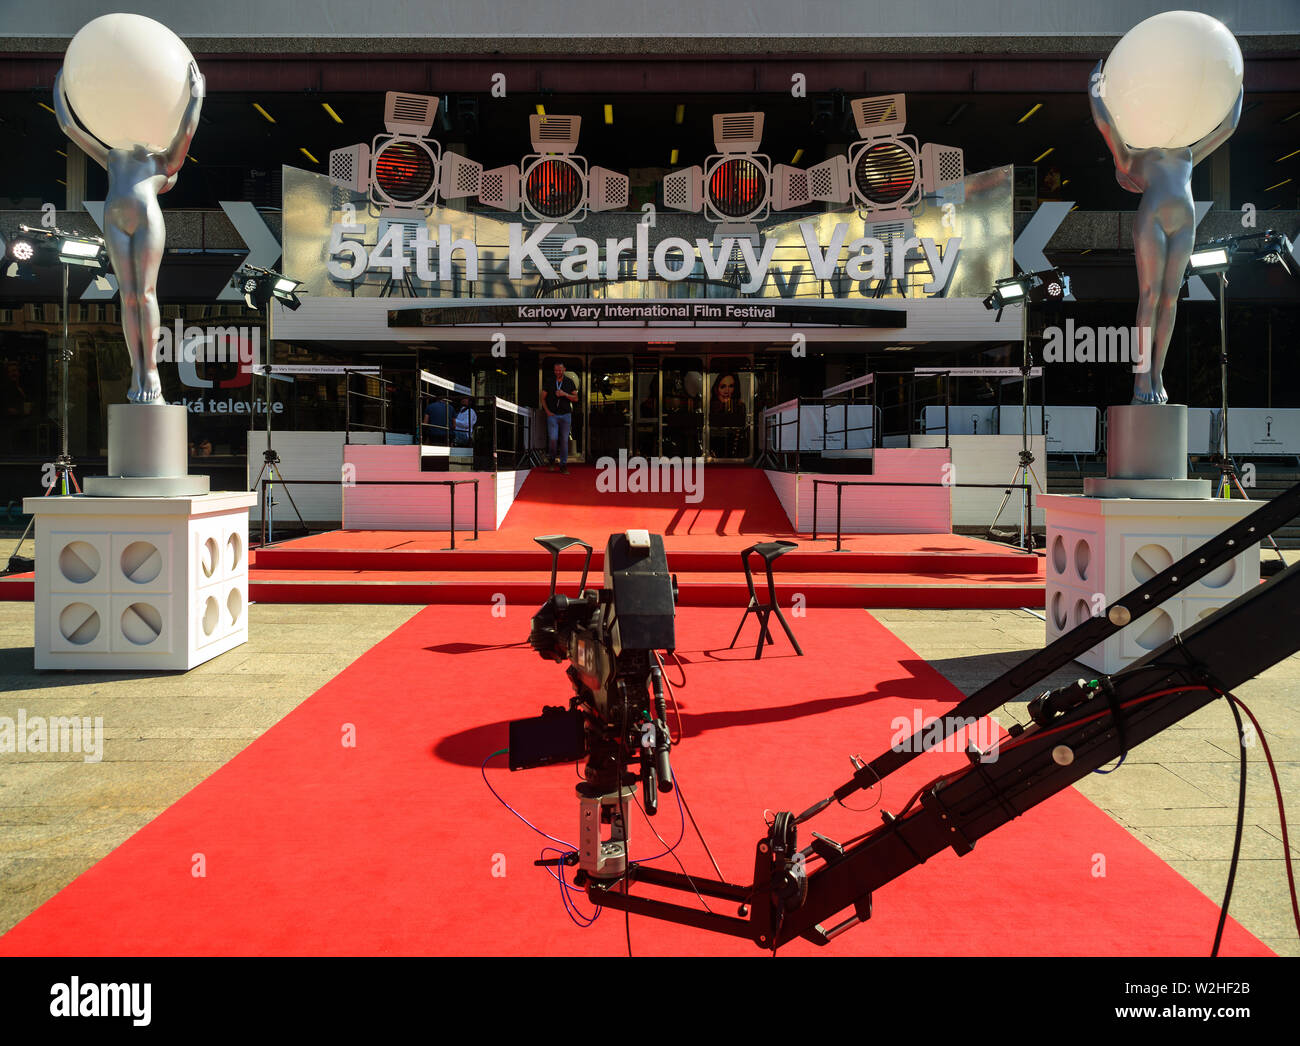 KARLOVY VARY, CZECH REPUBLIC - JULY 02, 2019: The red carpet entrance to the Hotel Thermal 54th Karlovy Vary International Film Festival is shown on J Stock Photo